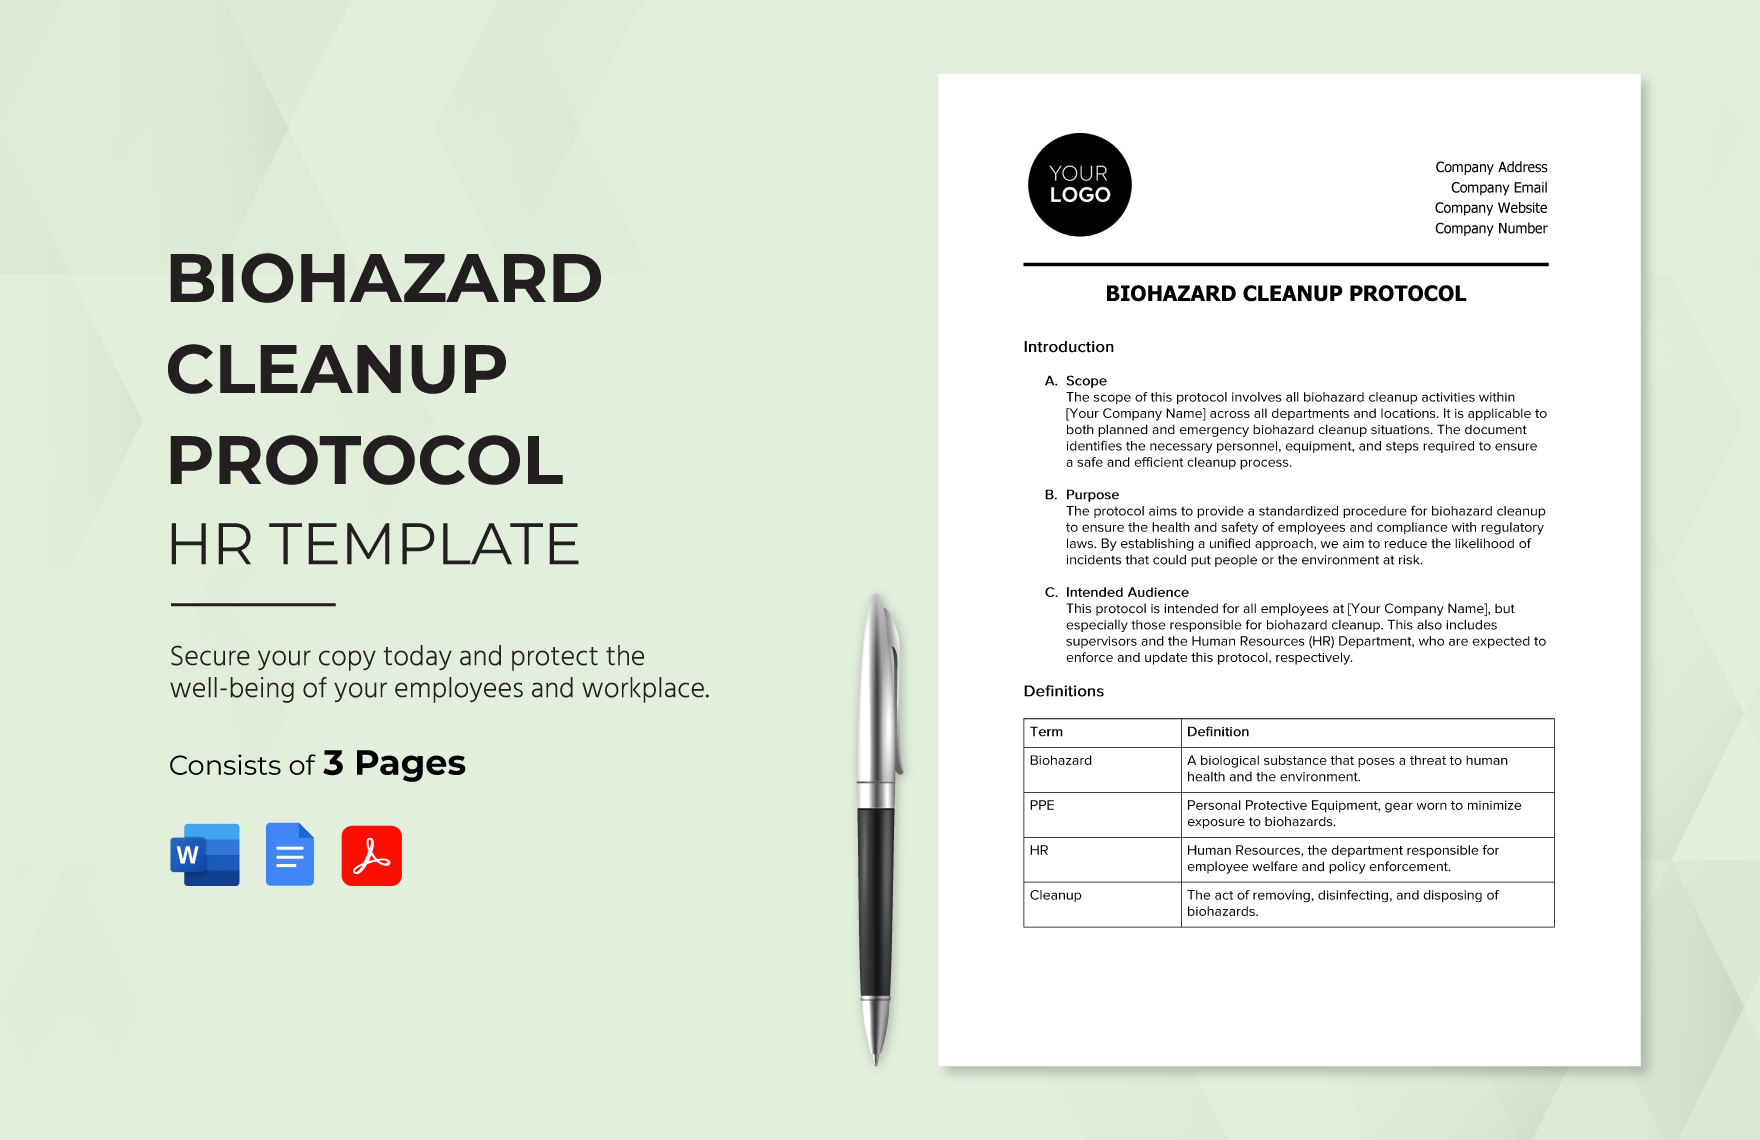 Biohazard Cleanup Protocol HR Template